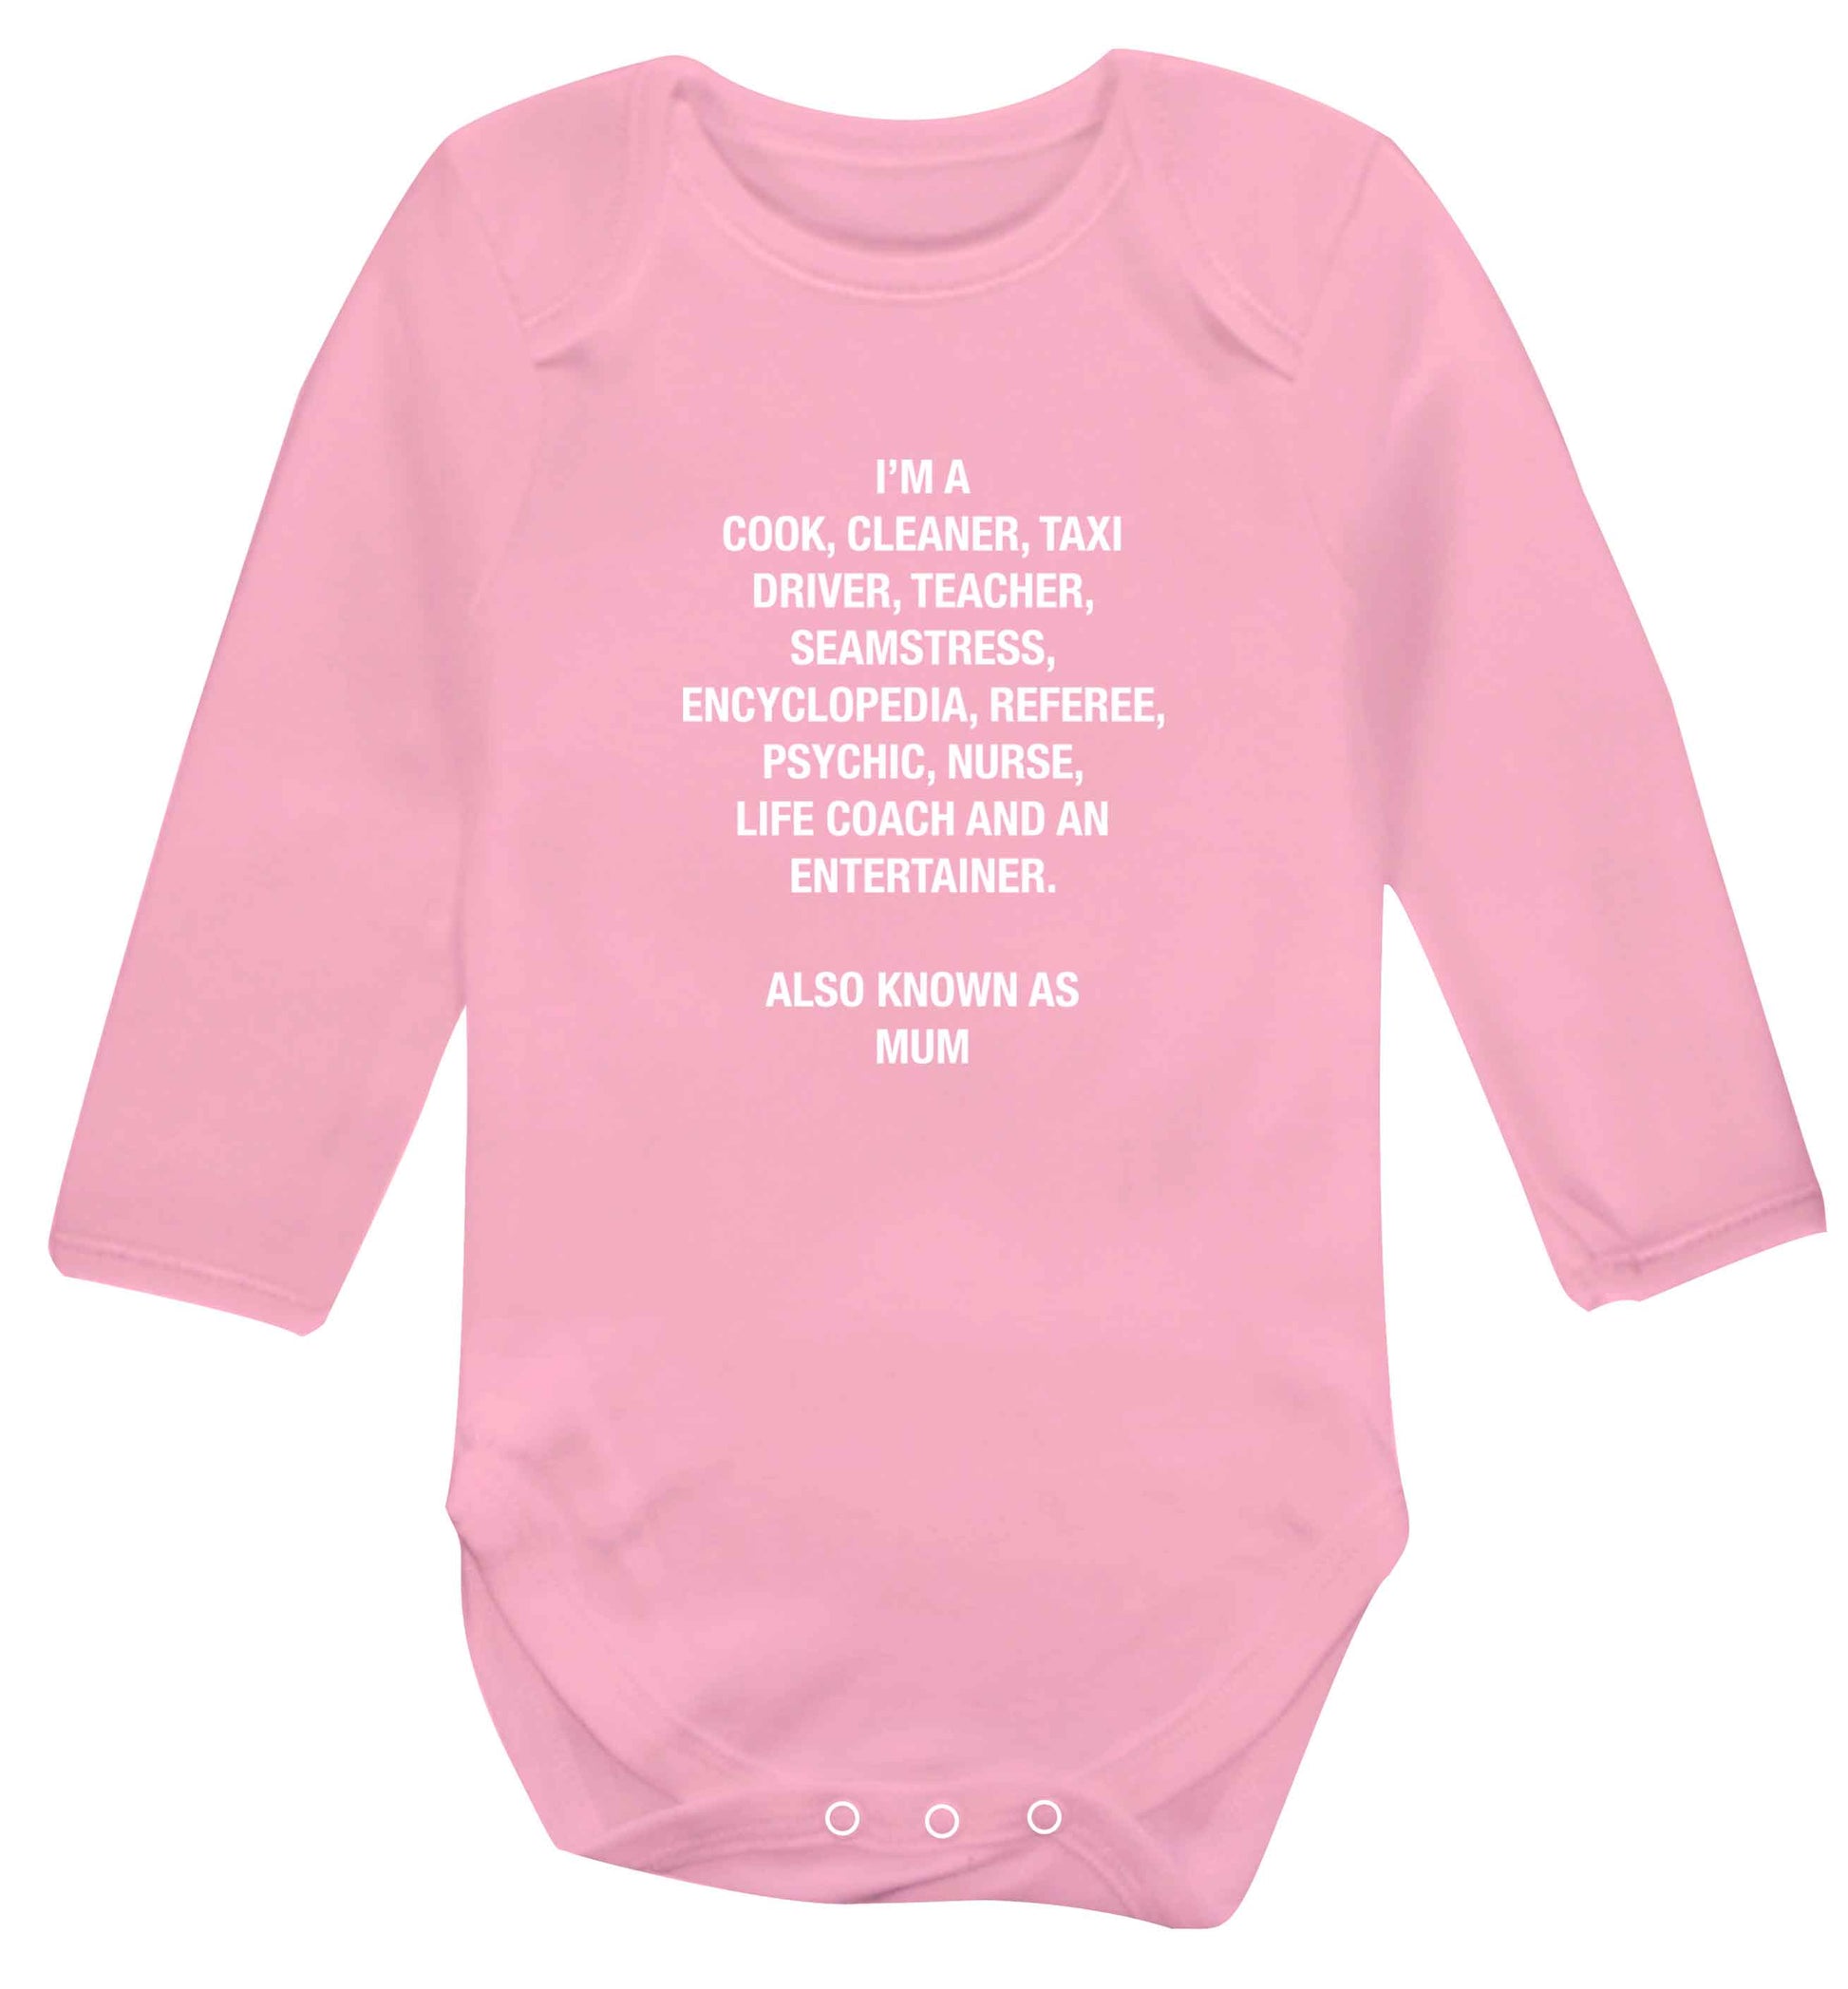 Funny gifts for your mum on mother's dayor her birthday! Mum, cook, cleaner, taxi driver, teacher, seamstress, encyclopedia, referee, psychic, nurse, life coach and entertainer baby vest long sleeved pale pink 6-12 months